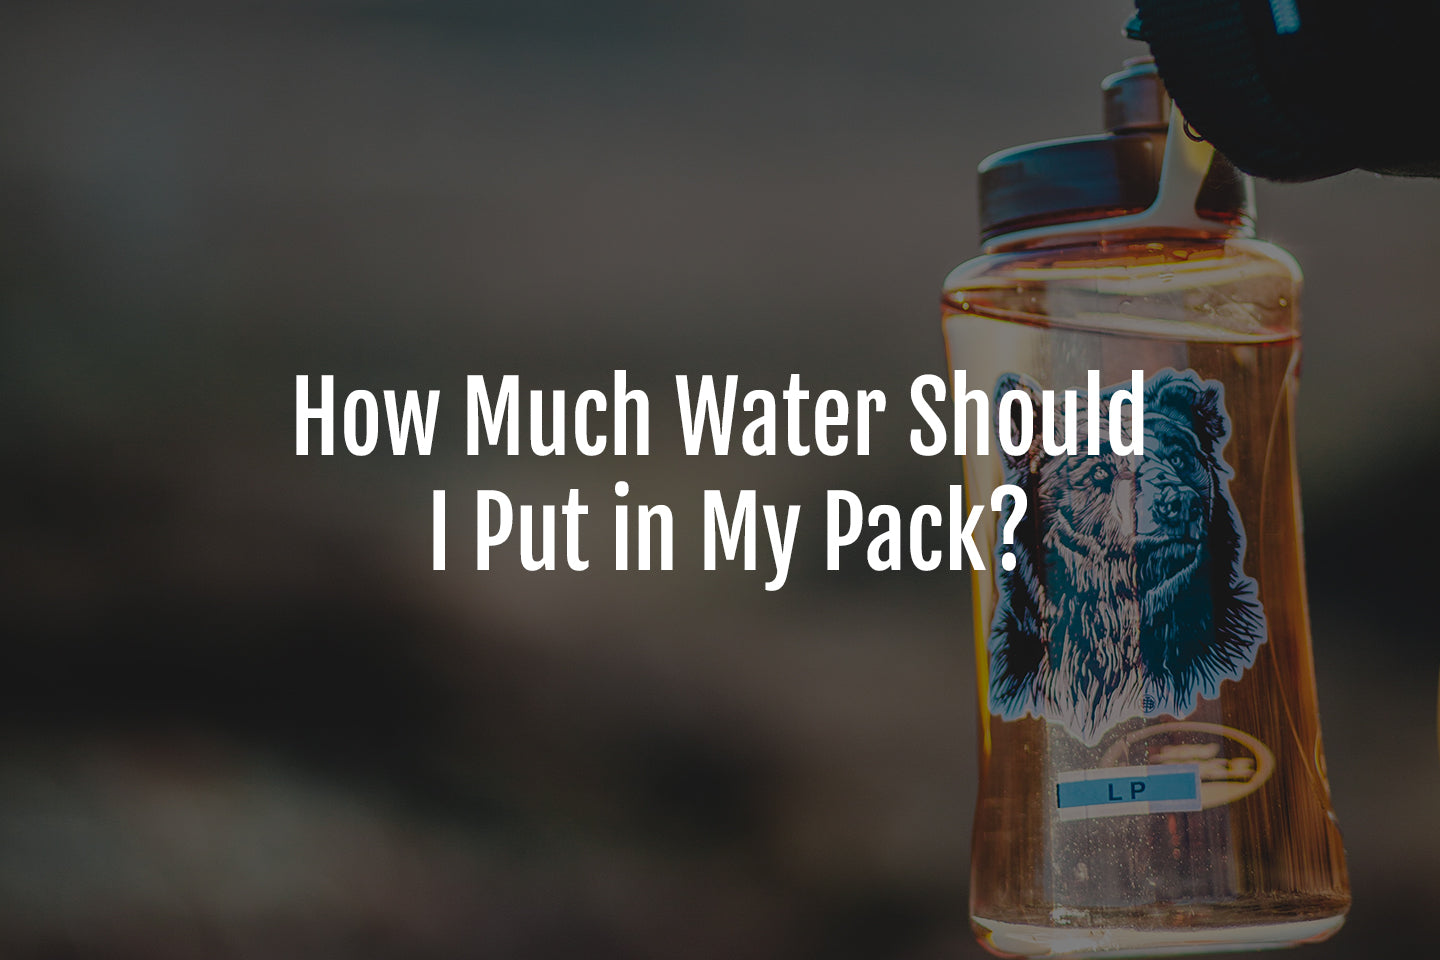 How Much Water Should I Put in My Pack?